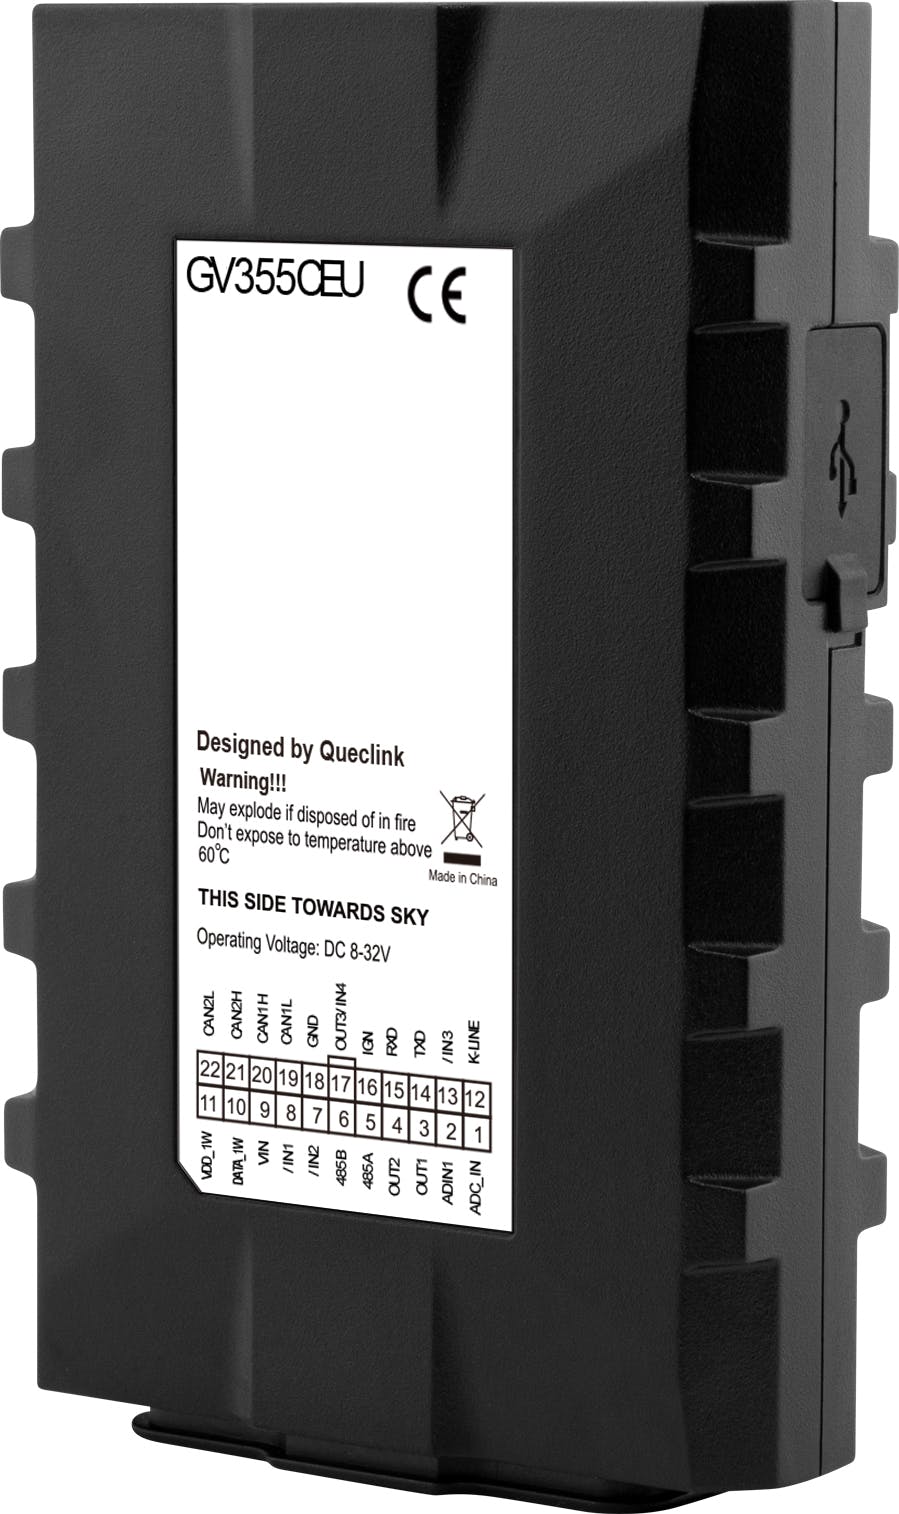 Queclink's GV355CEU tracking device is available on GpsGate